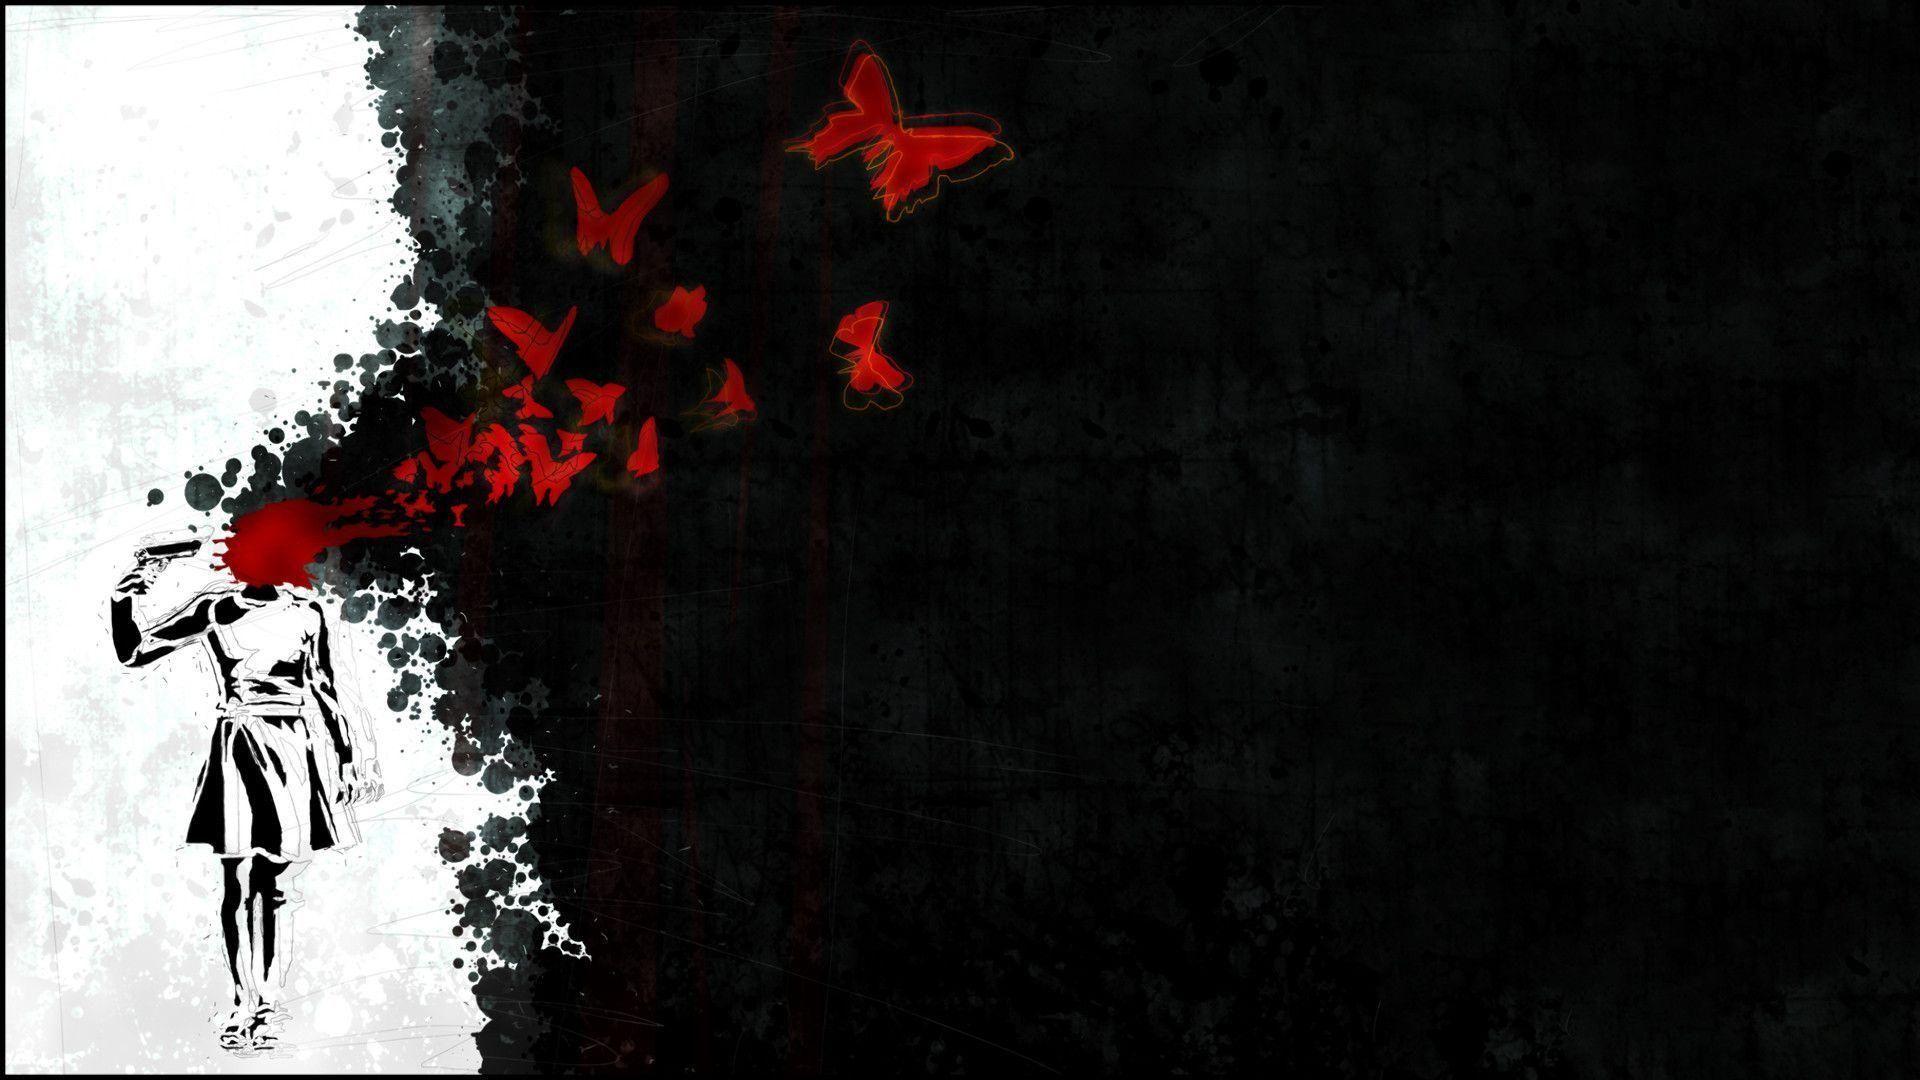 Dark Red Anime Wallpapers Top Free Dark Red Anime Backgrounds